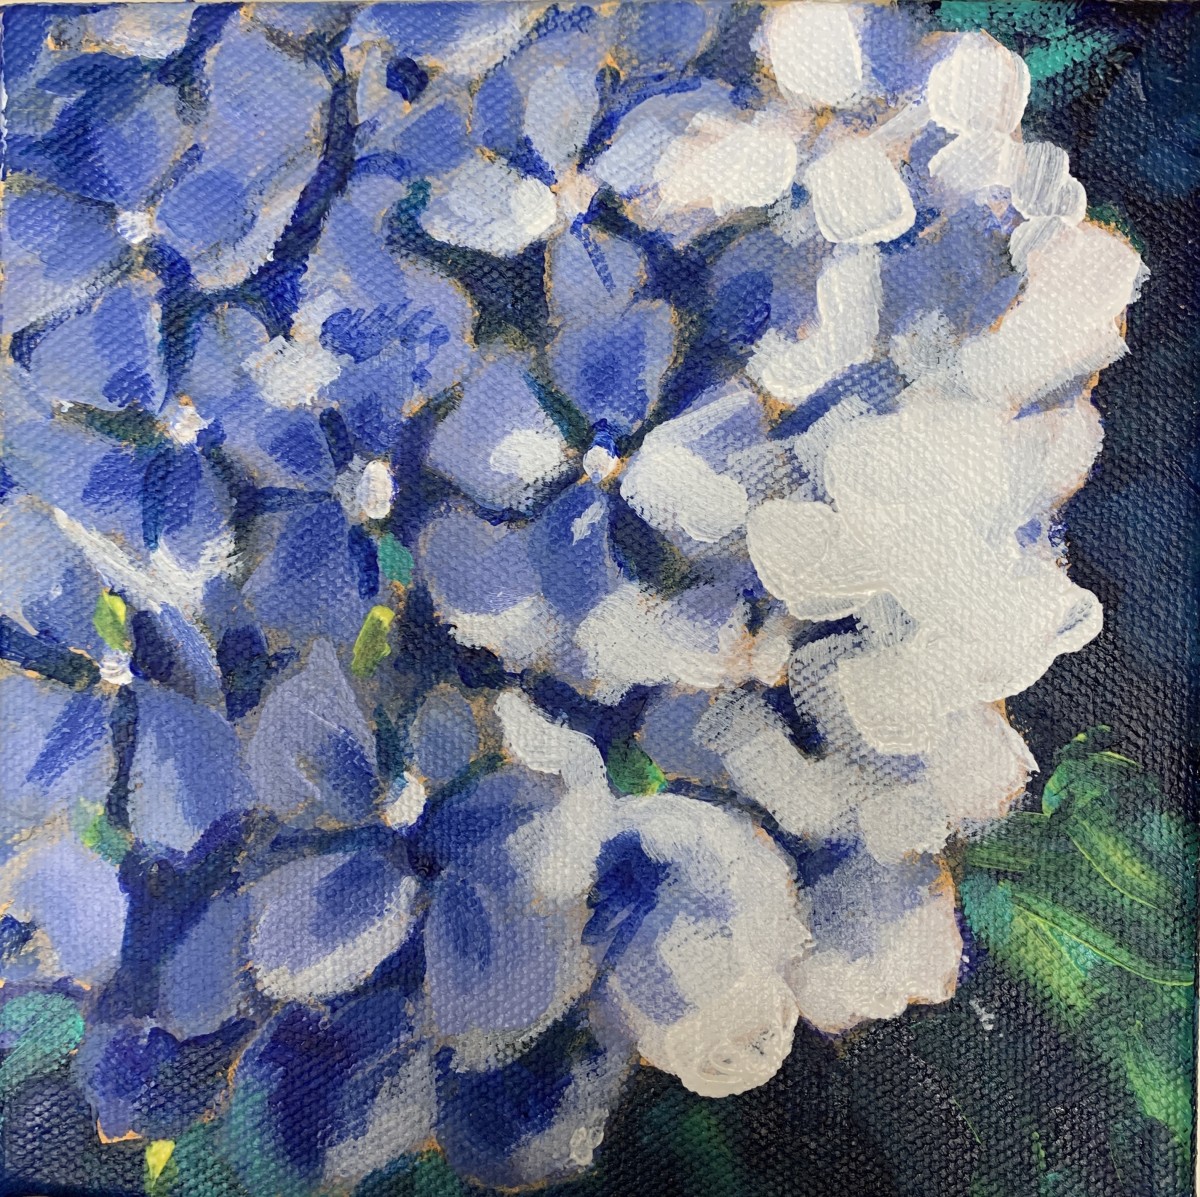 Hydrangea series: Blue too by Marcia Hoeck 